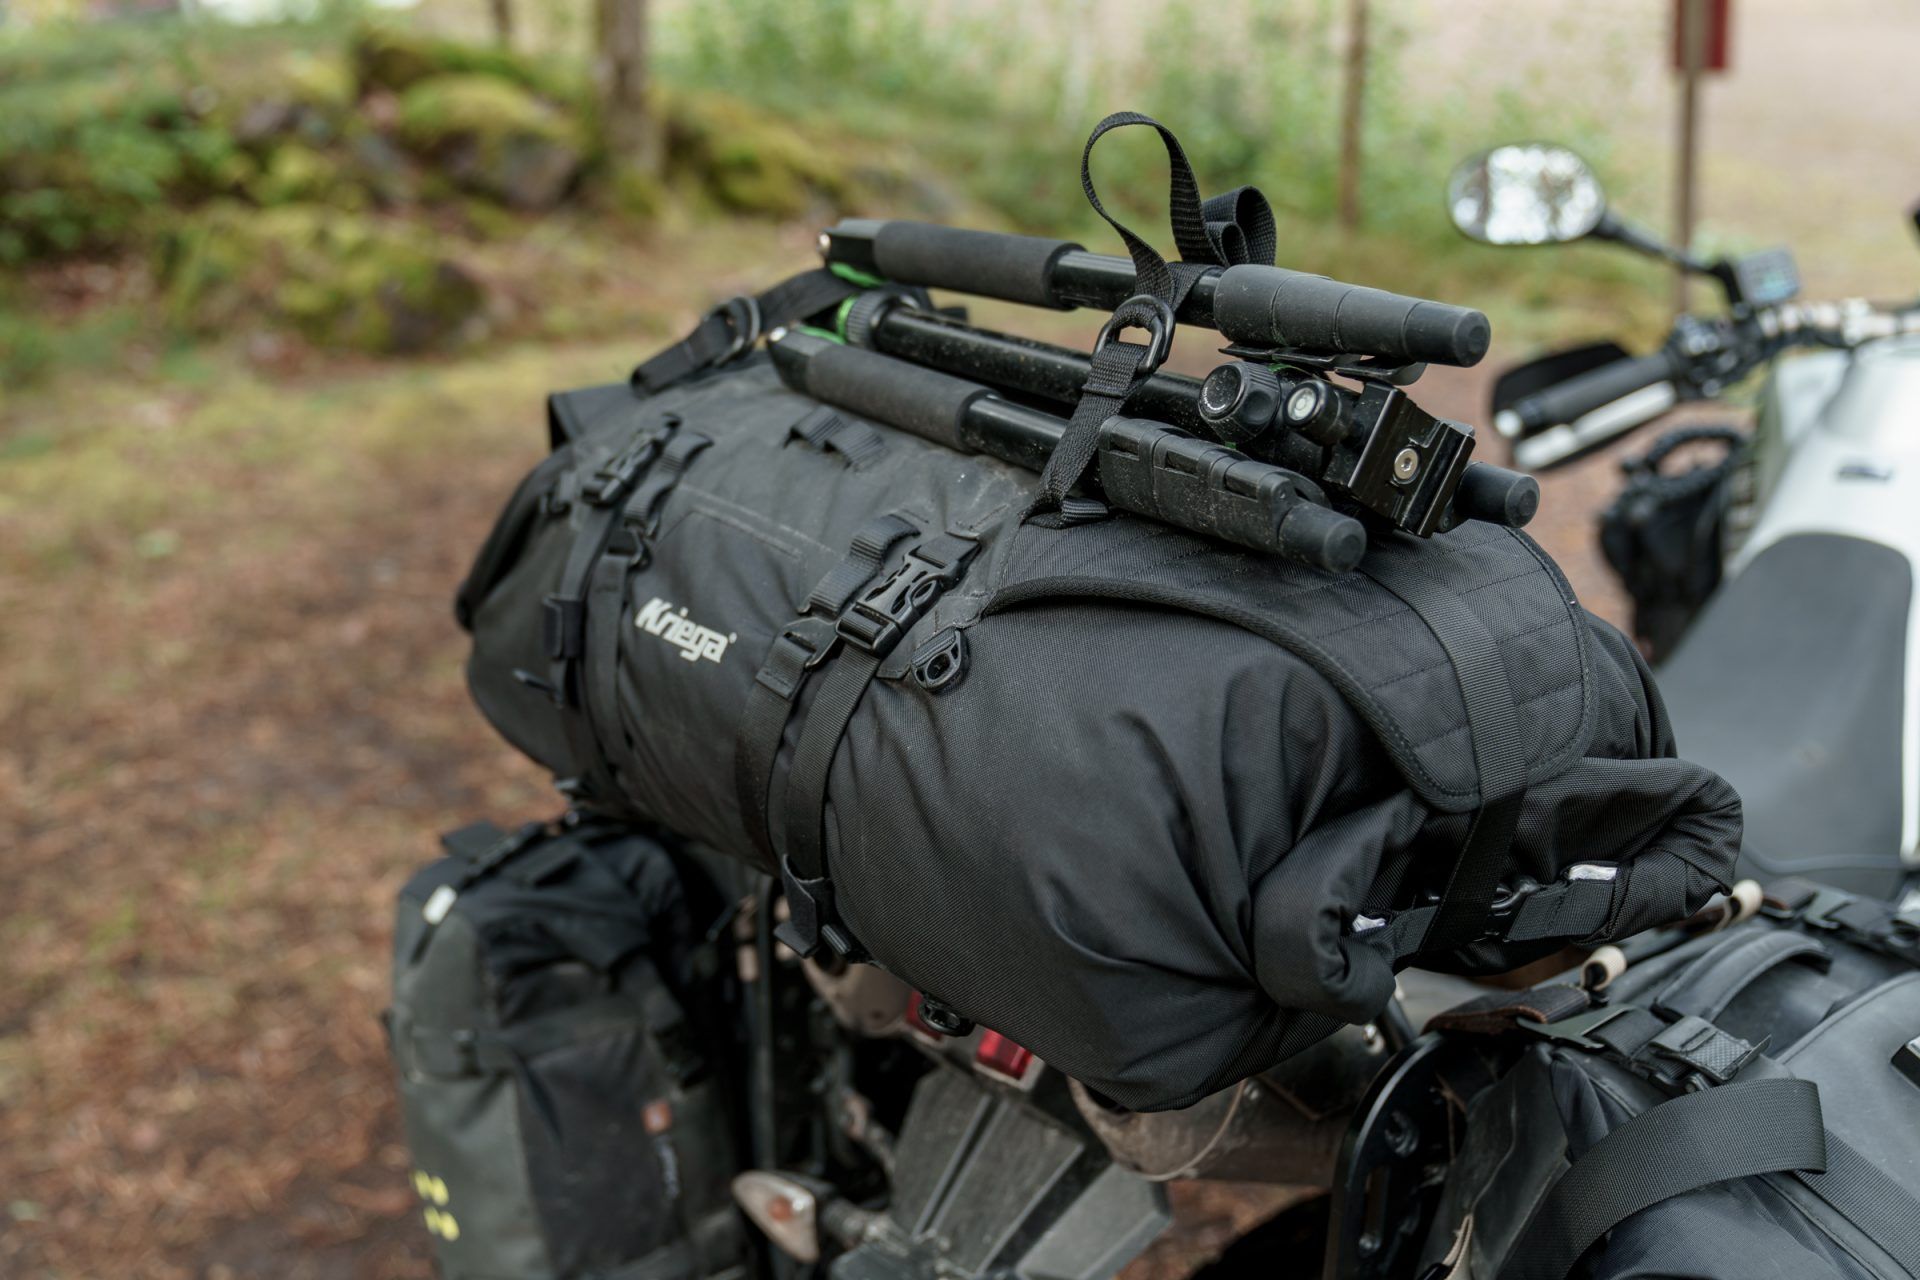 Motorcycle rollbag